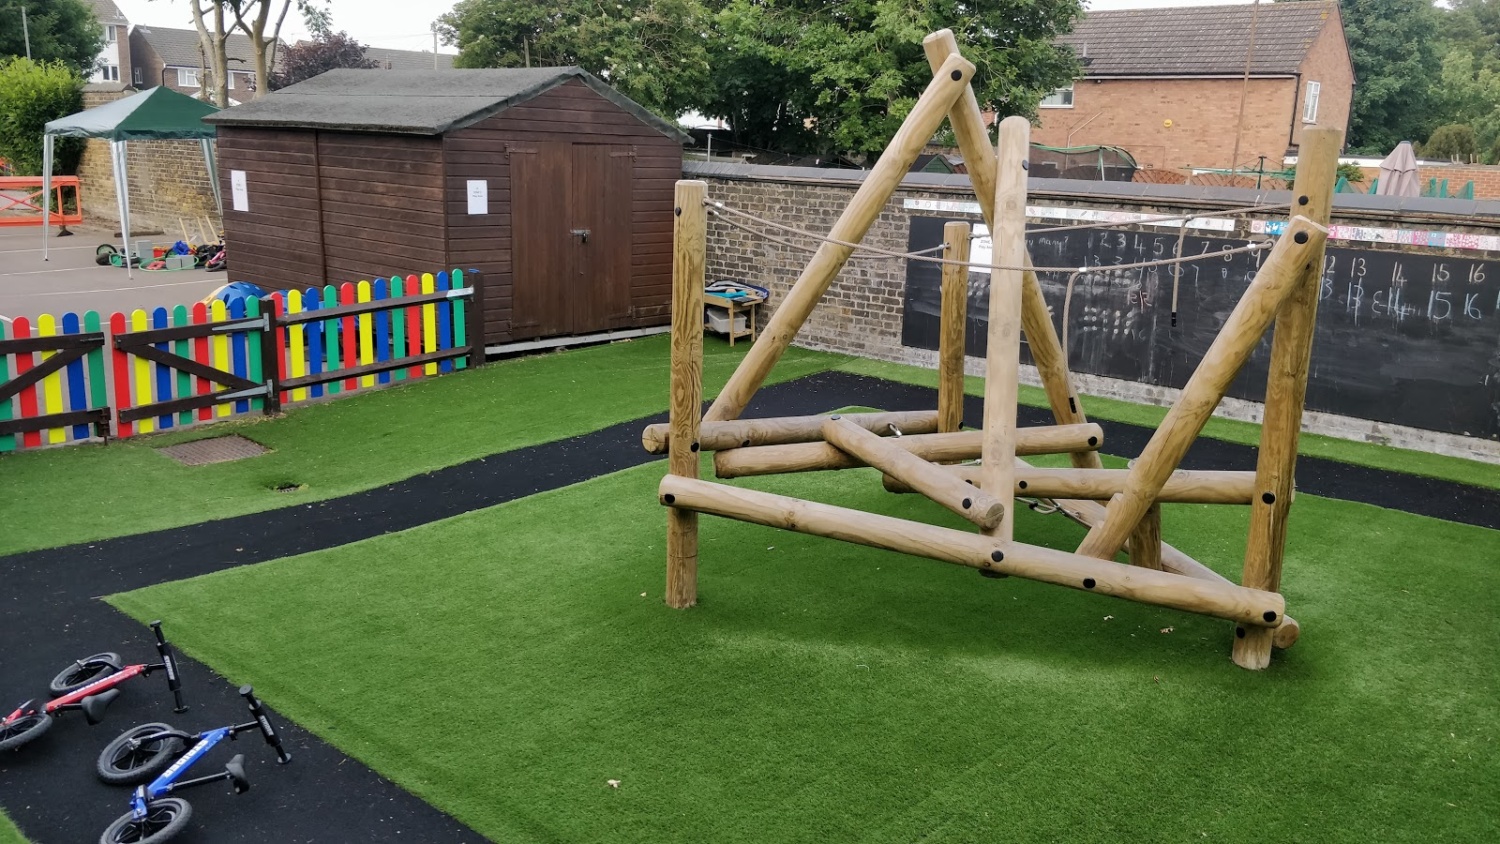 Photo showing an outdoor play area on the Dartford Primary Academy grounds, with a wooden climbing frame seen.